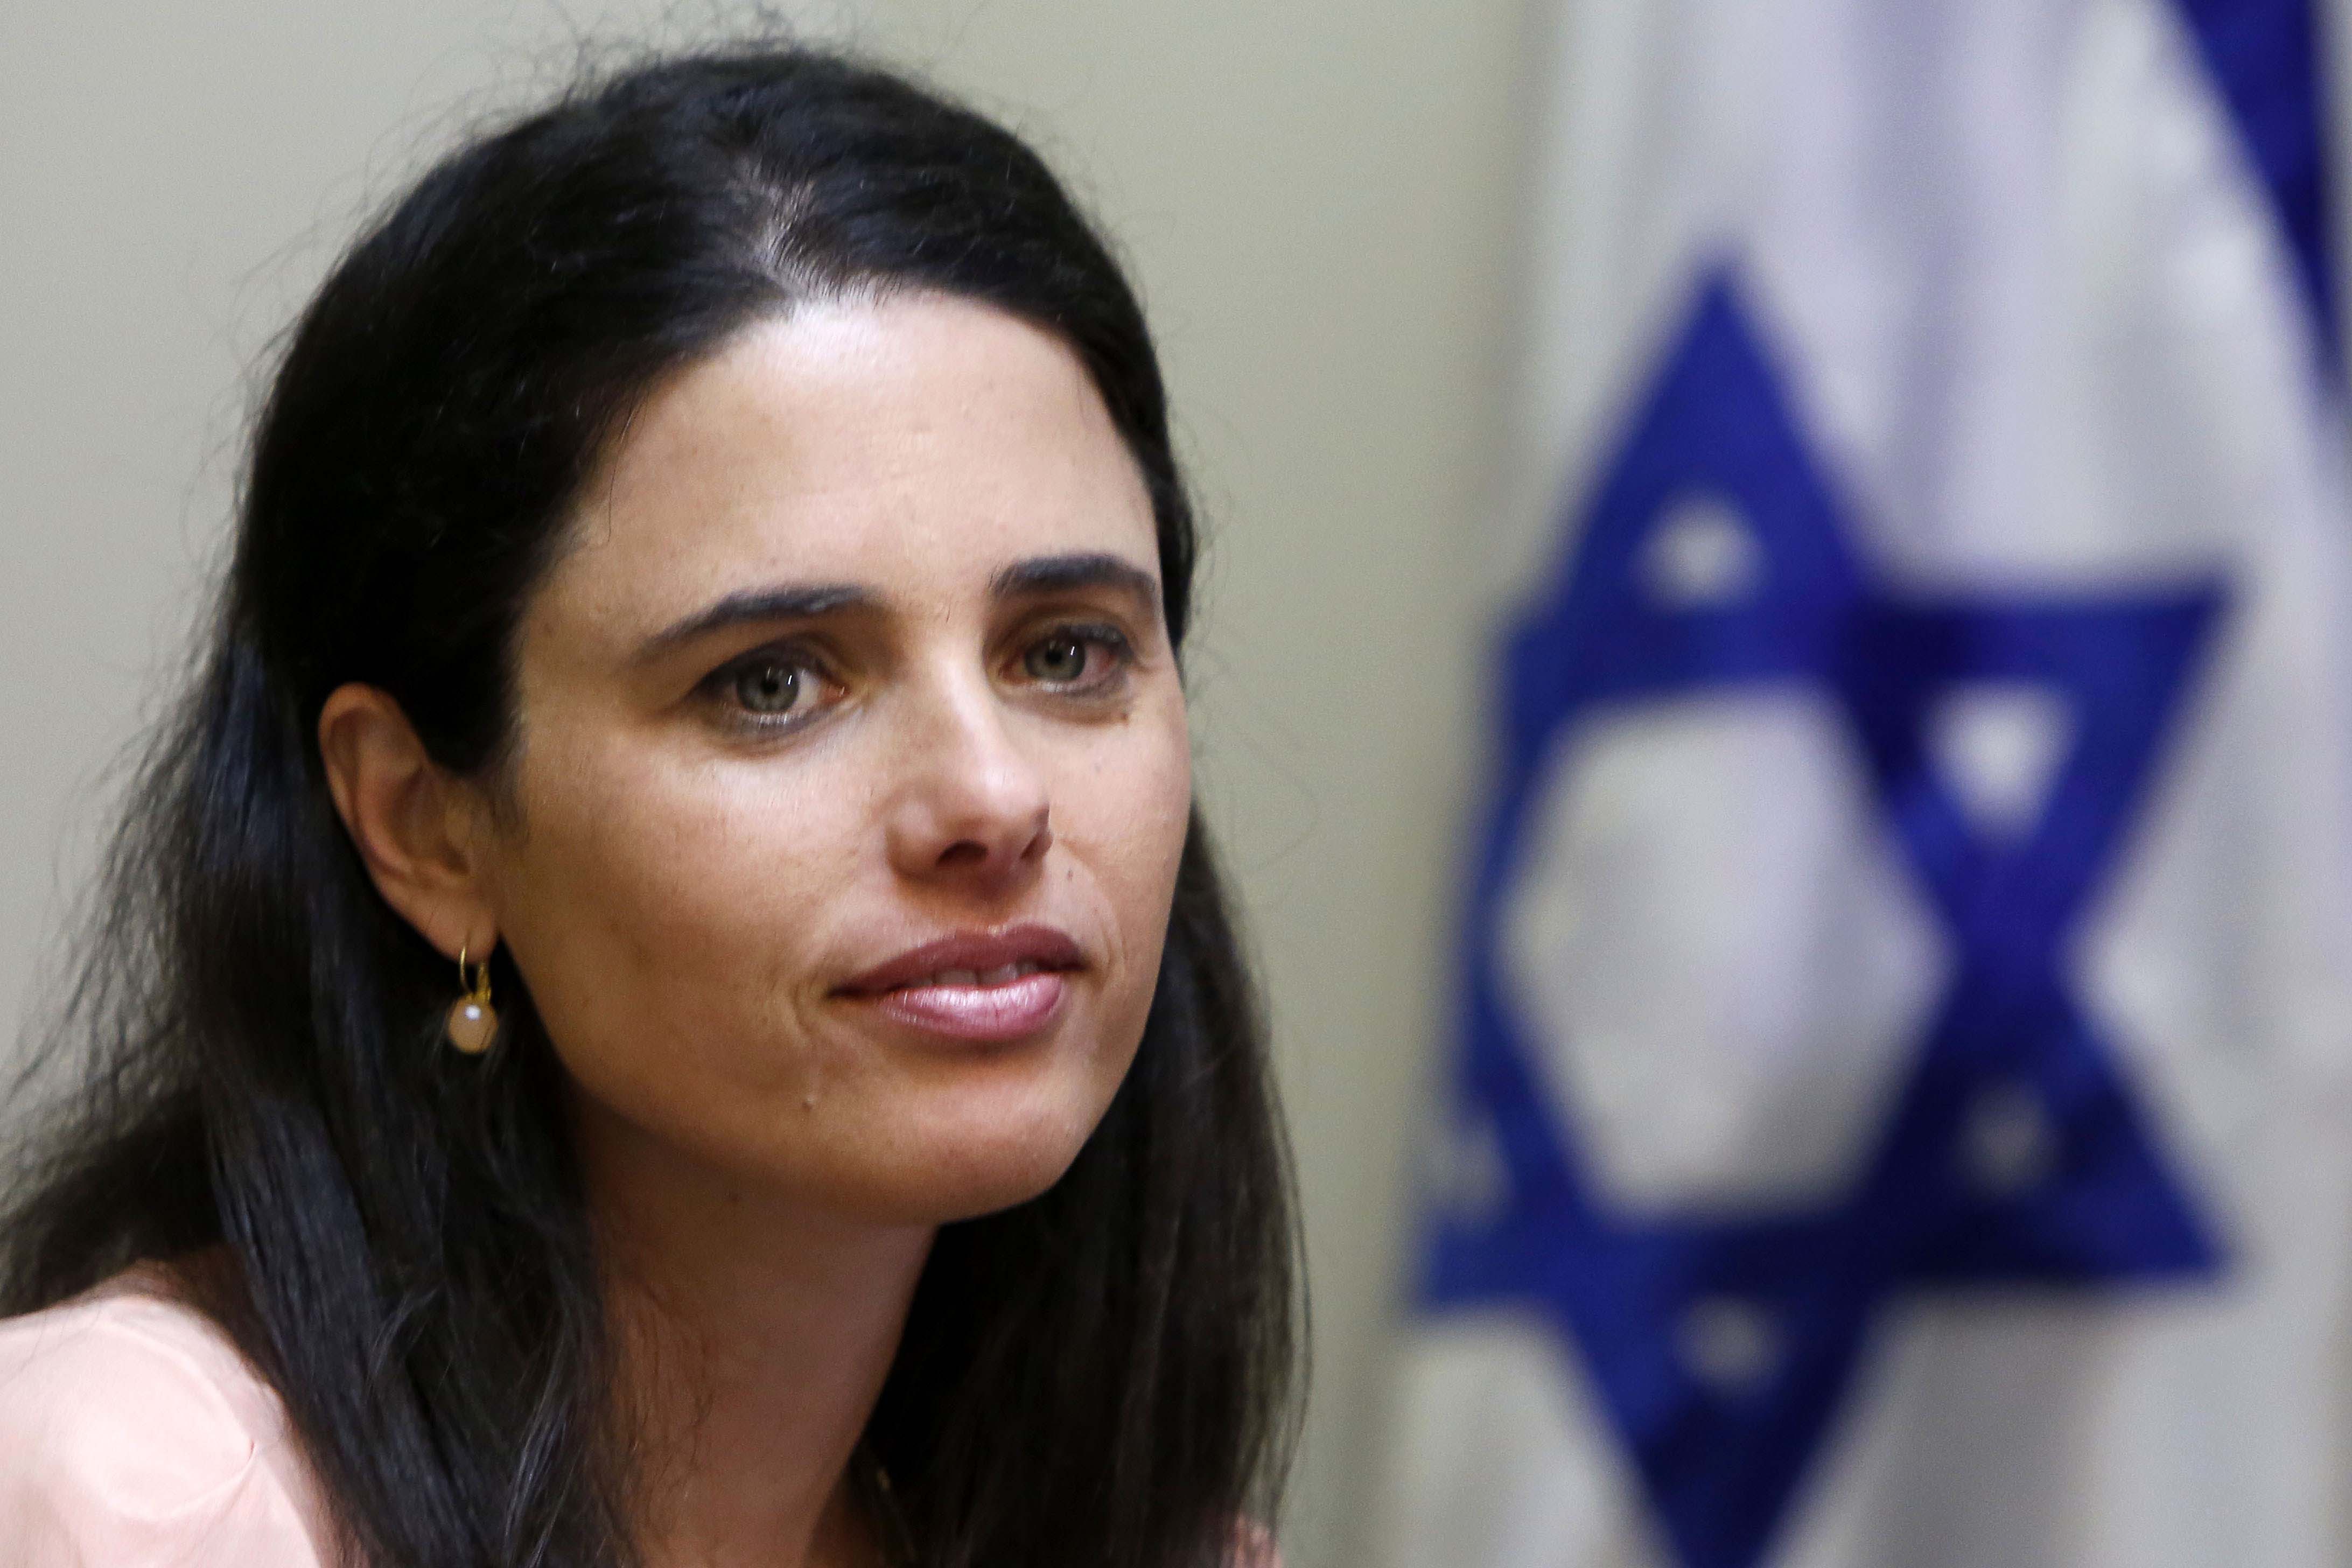 Does Israel’s NGO Bill Safeguard Transparency or Attack Freedom of Speech?